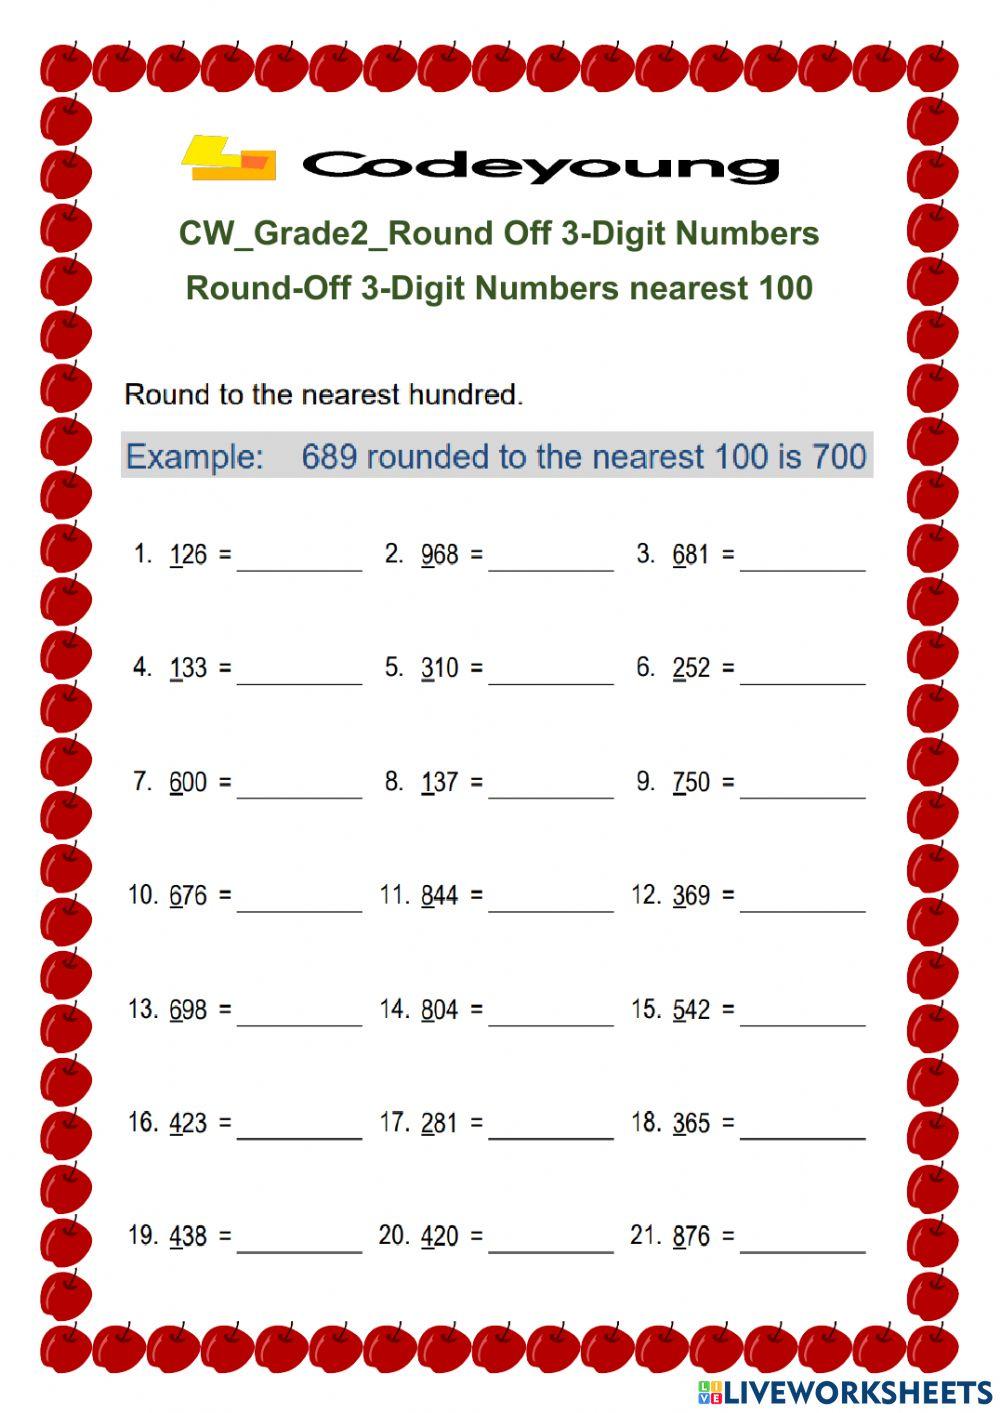 Round-Off 3-Digit Numbers nearest 100